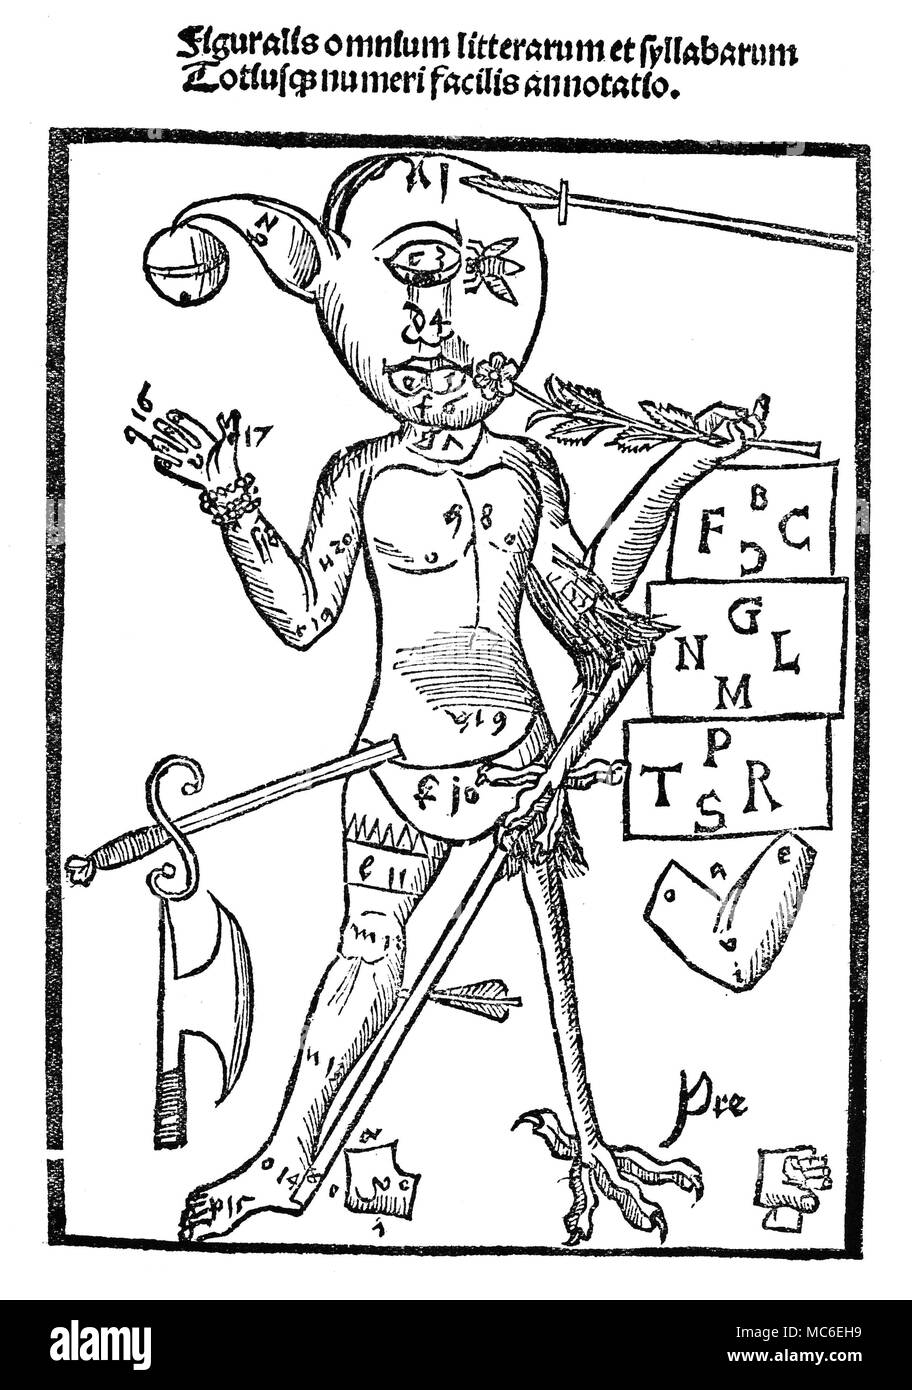 OCCULT - ART OF MEMORY Woodcut, illustrative of the picture making that may result from the intelligent use of the art of Memory: the constructed [mental] image becomes a useful mnemonic. From Nicolas Simon, Ludus Artificialis Oblivionis, 1510. Stock Photo